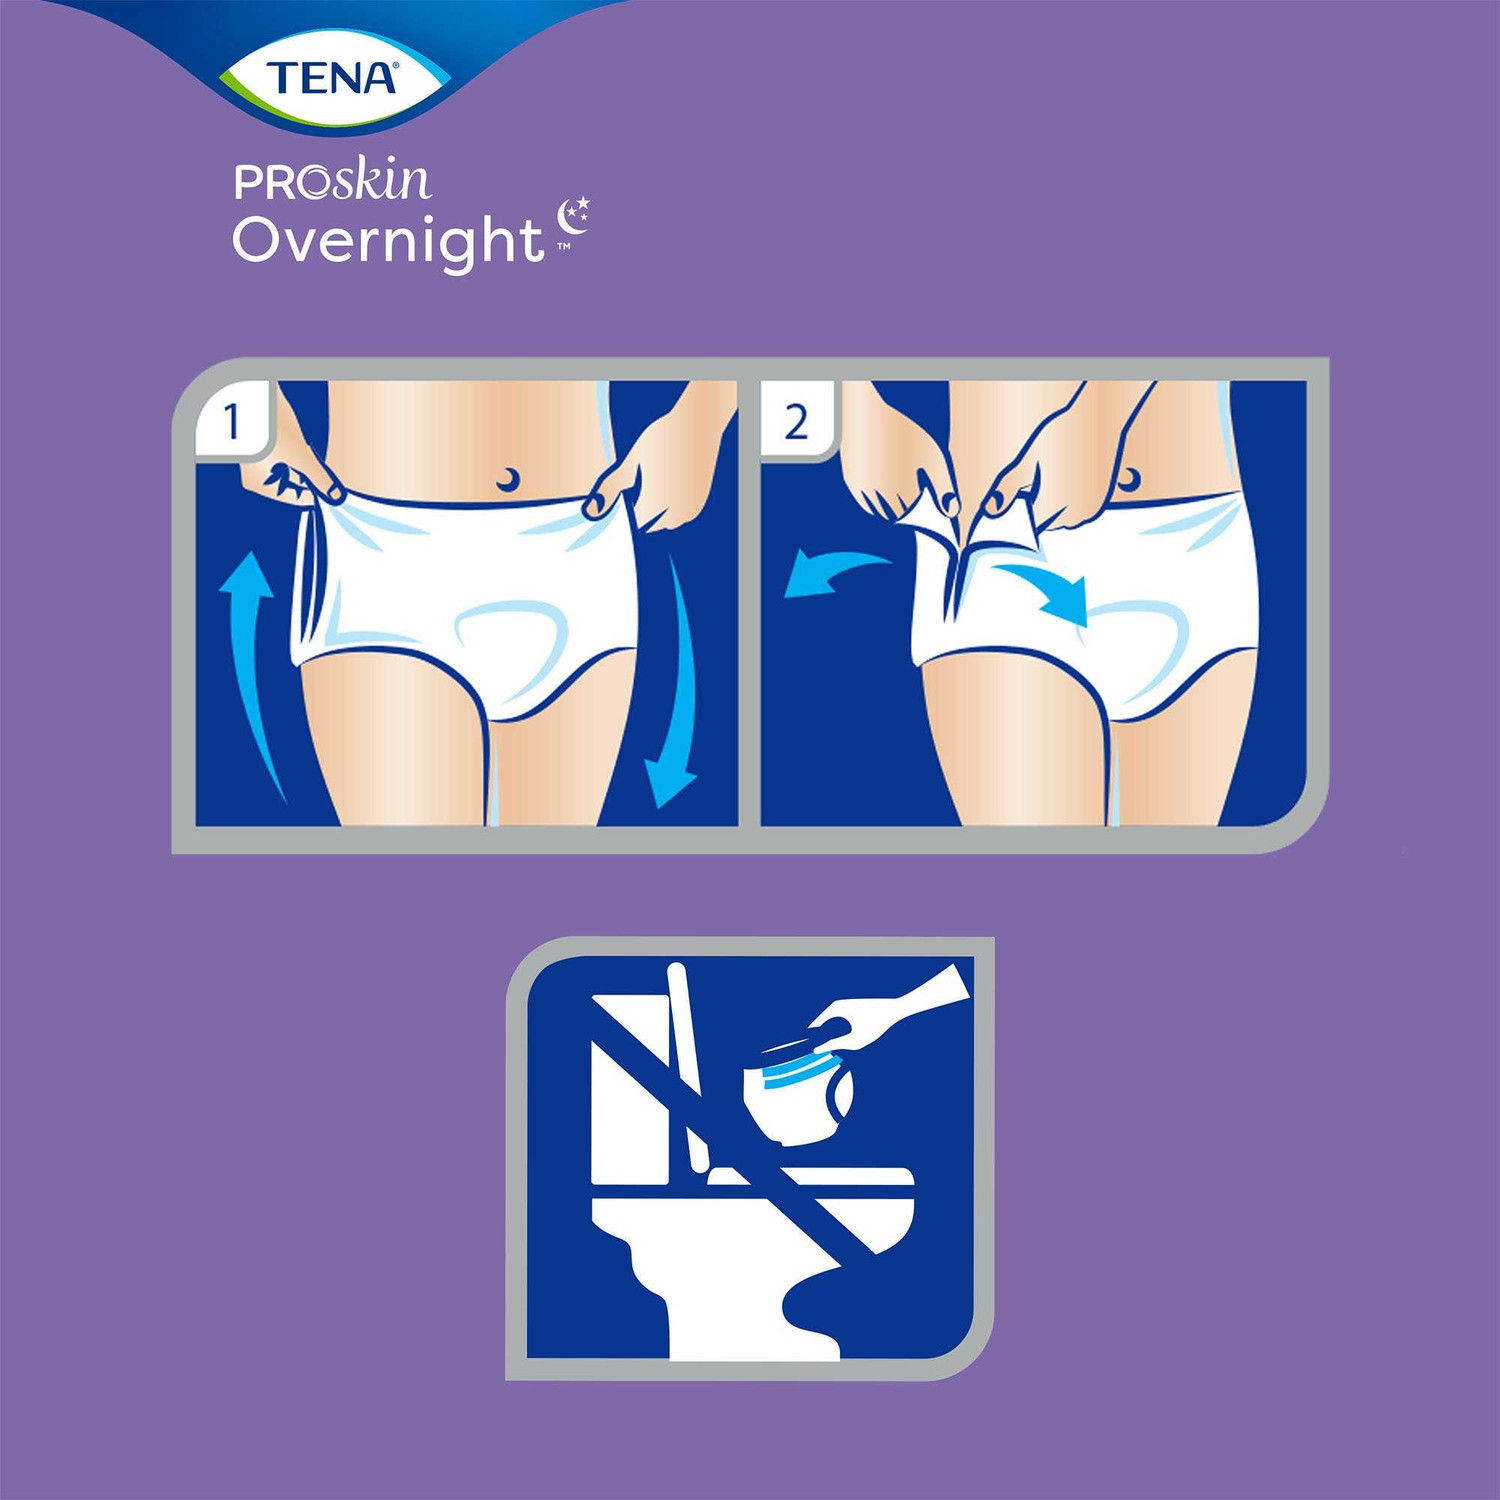 https://cdn11.bigcommerce.com/s-1l9d1d1d79/images/stencil/1500x1500/products/112605/255237/Adult-Absorbent-Underwear-Tena-Pull-On-Medium-Disposable-Heavy-Absorbency-72235-BG14-72235-SCA-PERSONAL-CARE-1053408BG_135471__61958.1682470857.jpg?c=2&imbypass=on